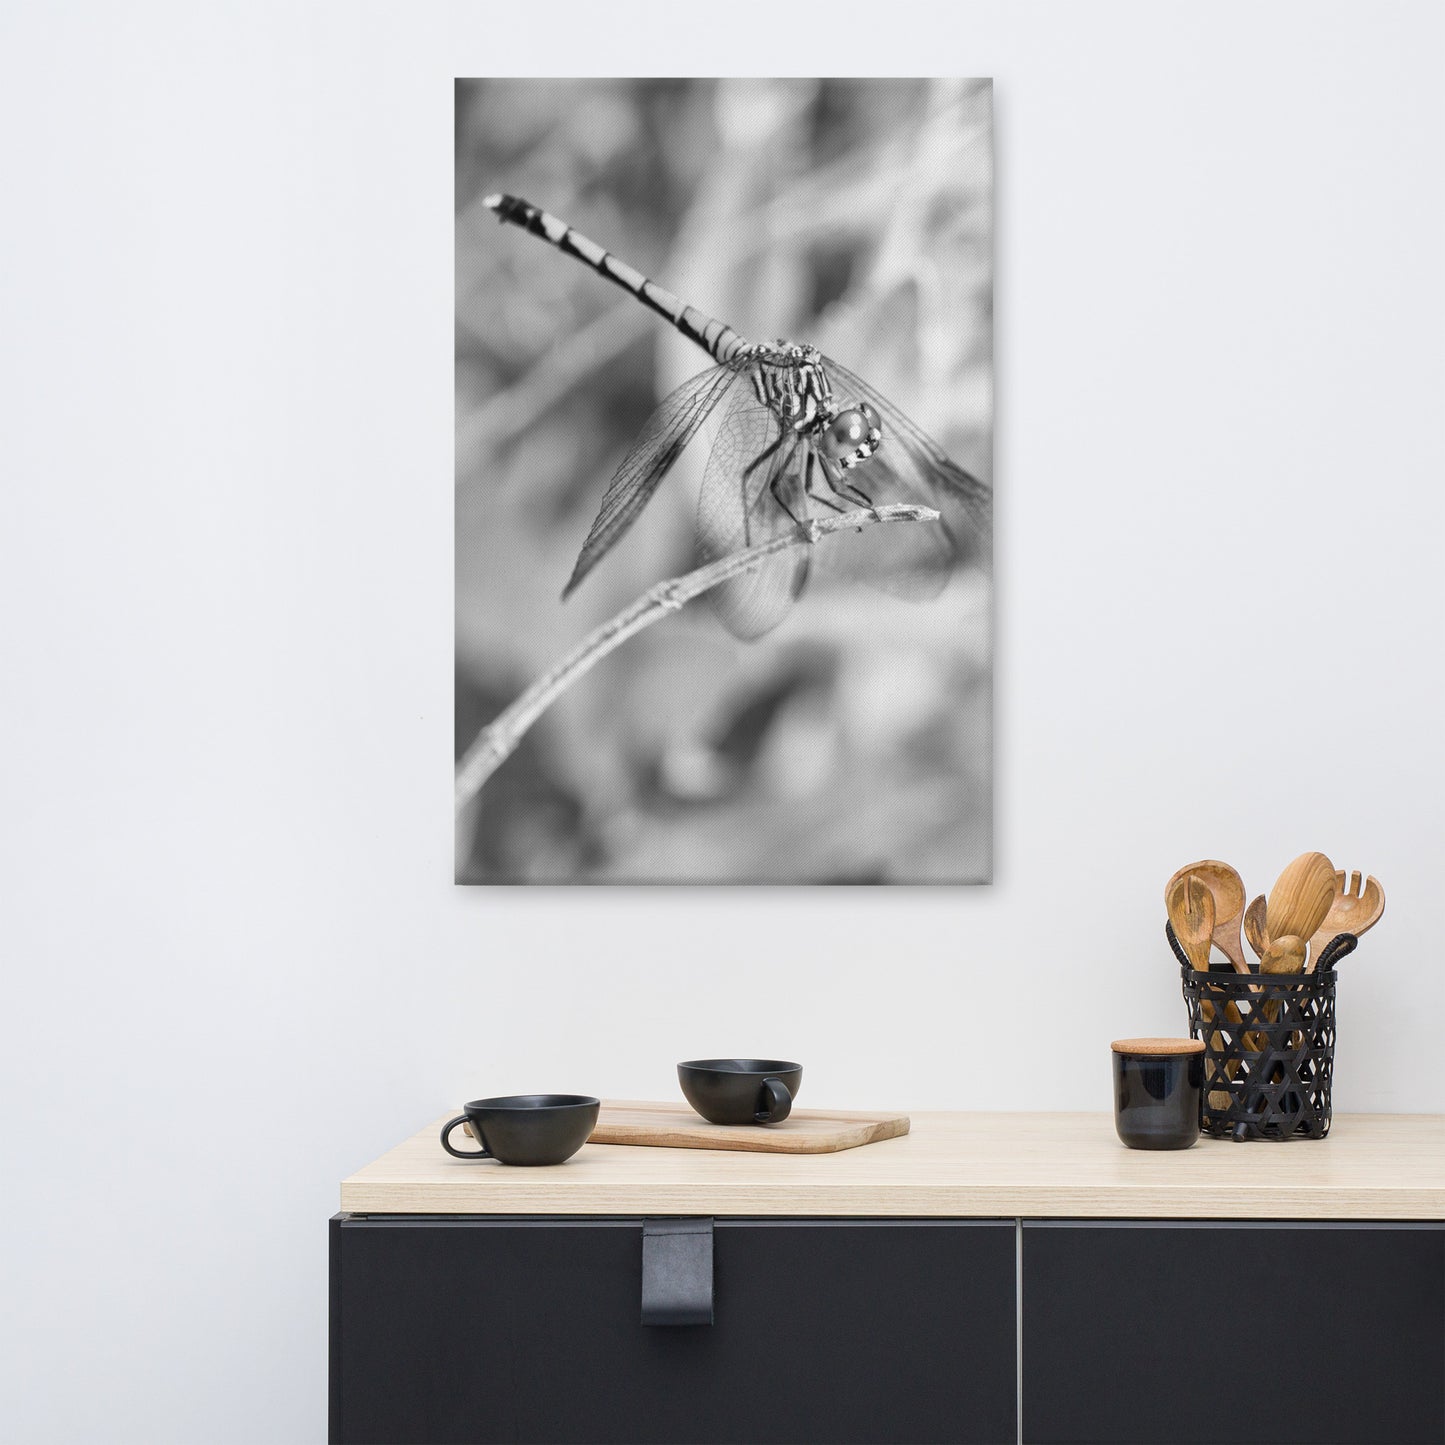 Dragonfly in Black and White Animal / Wildlife Photograph Canvas Wall Art Prints